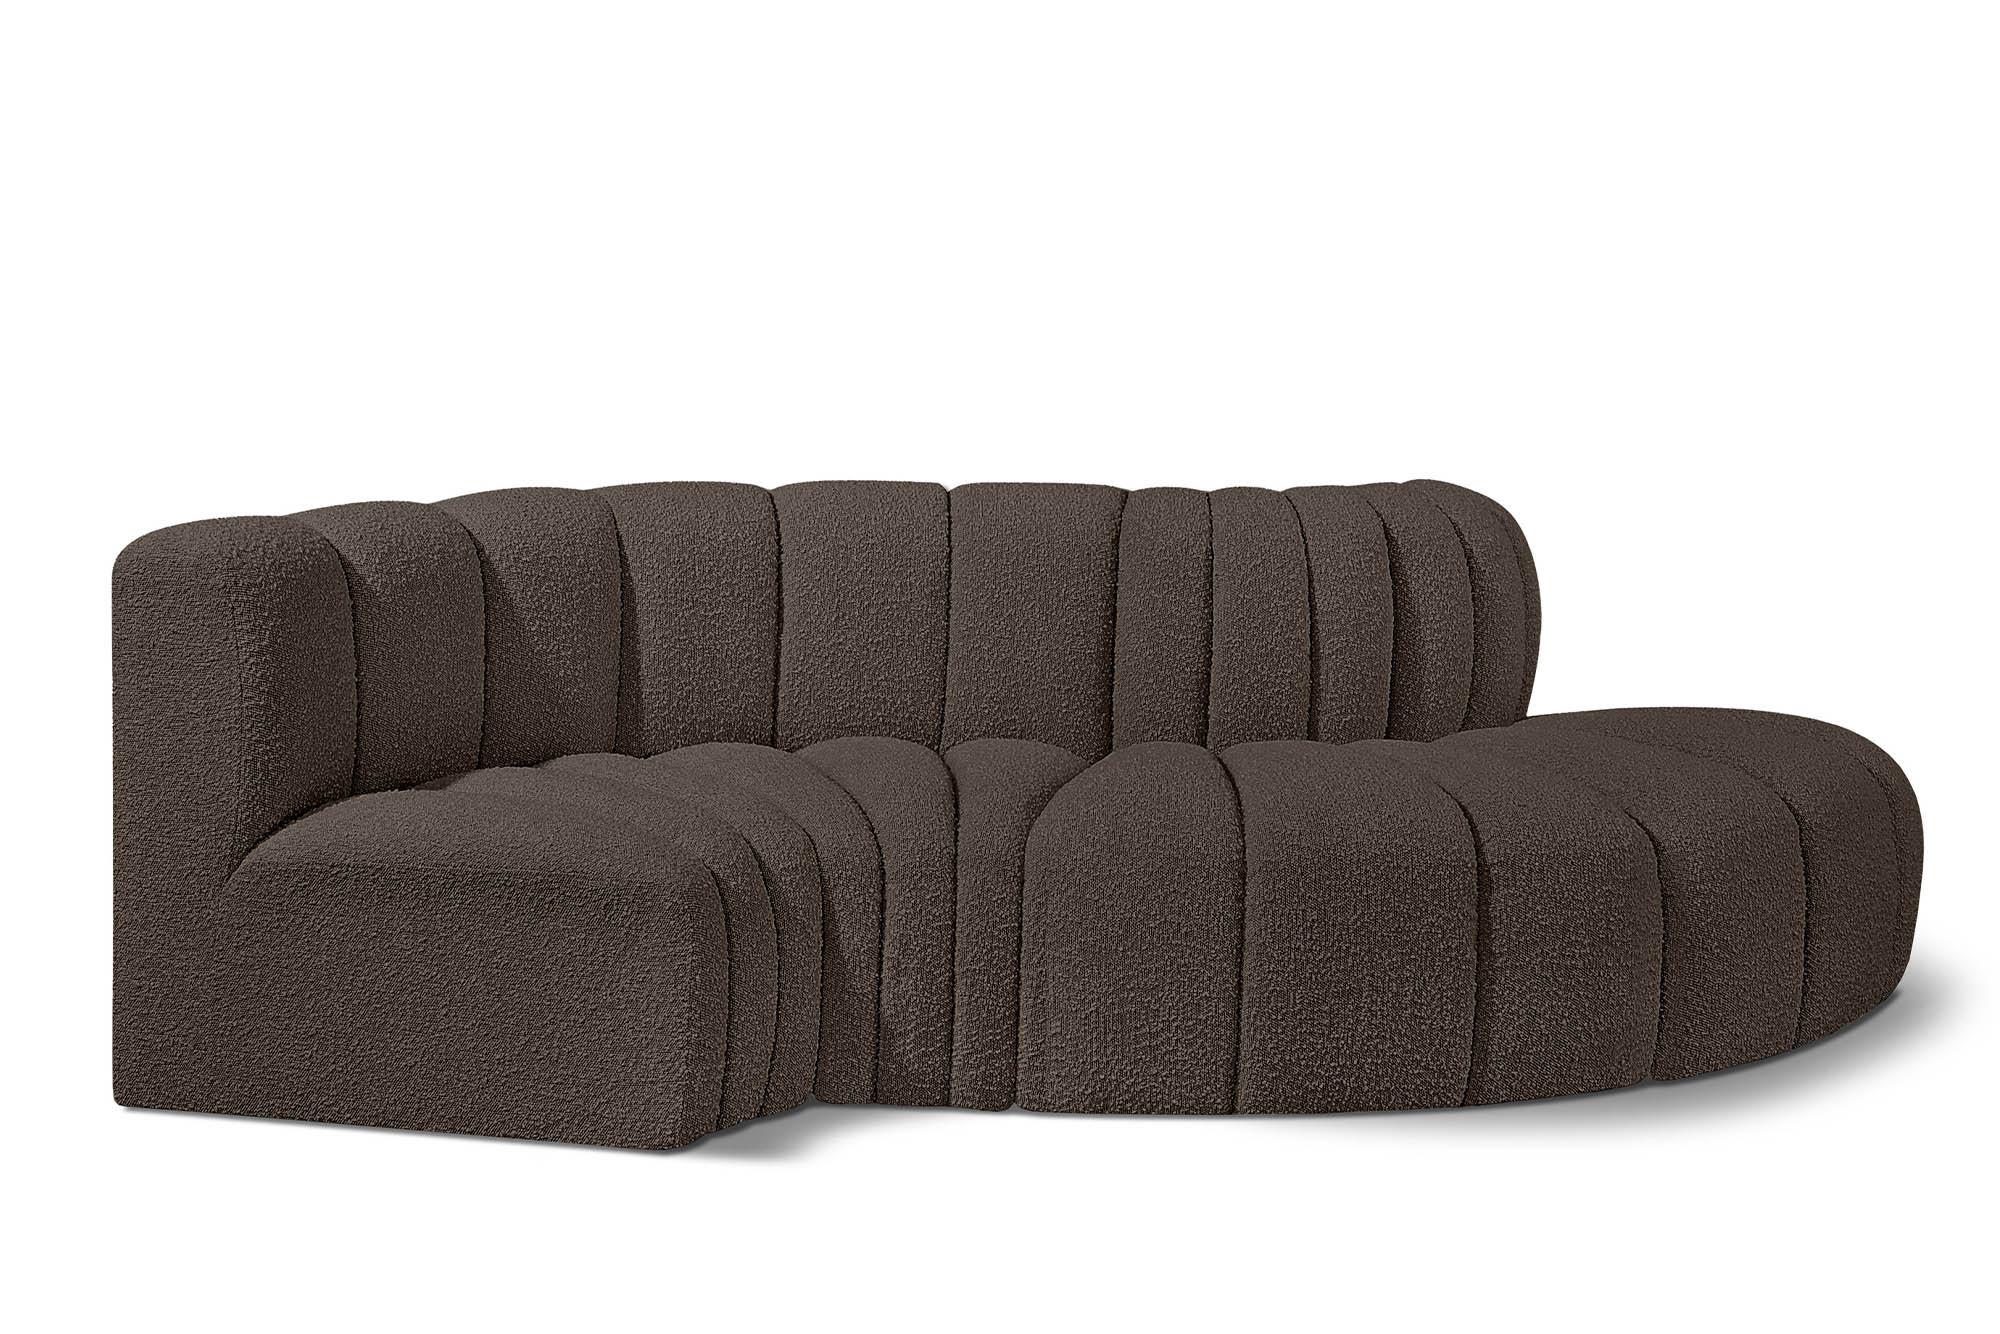 Contemporary, Modern Modular Sectional Sofa ARC 102Brown-S4D 102Brown-S4D in Brown 